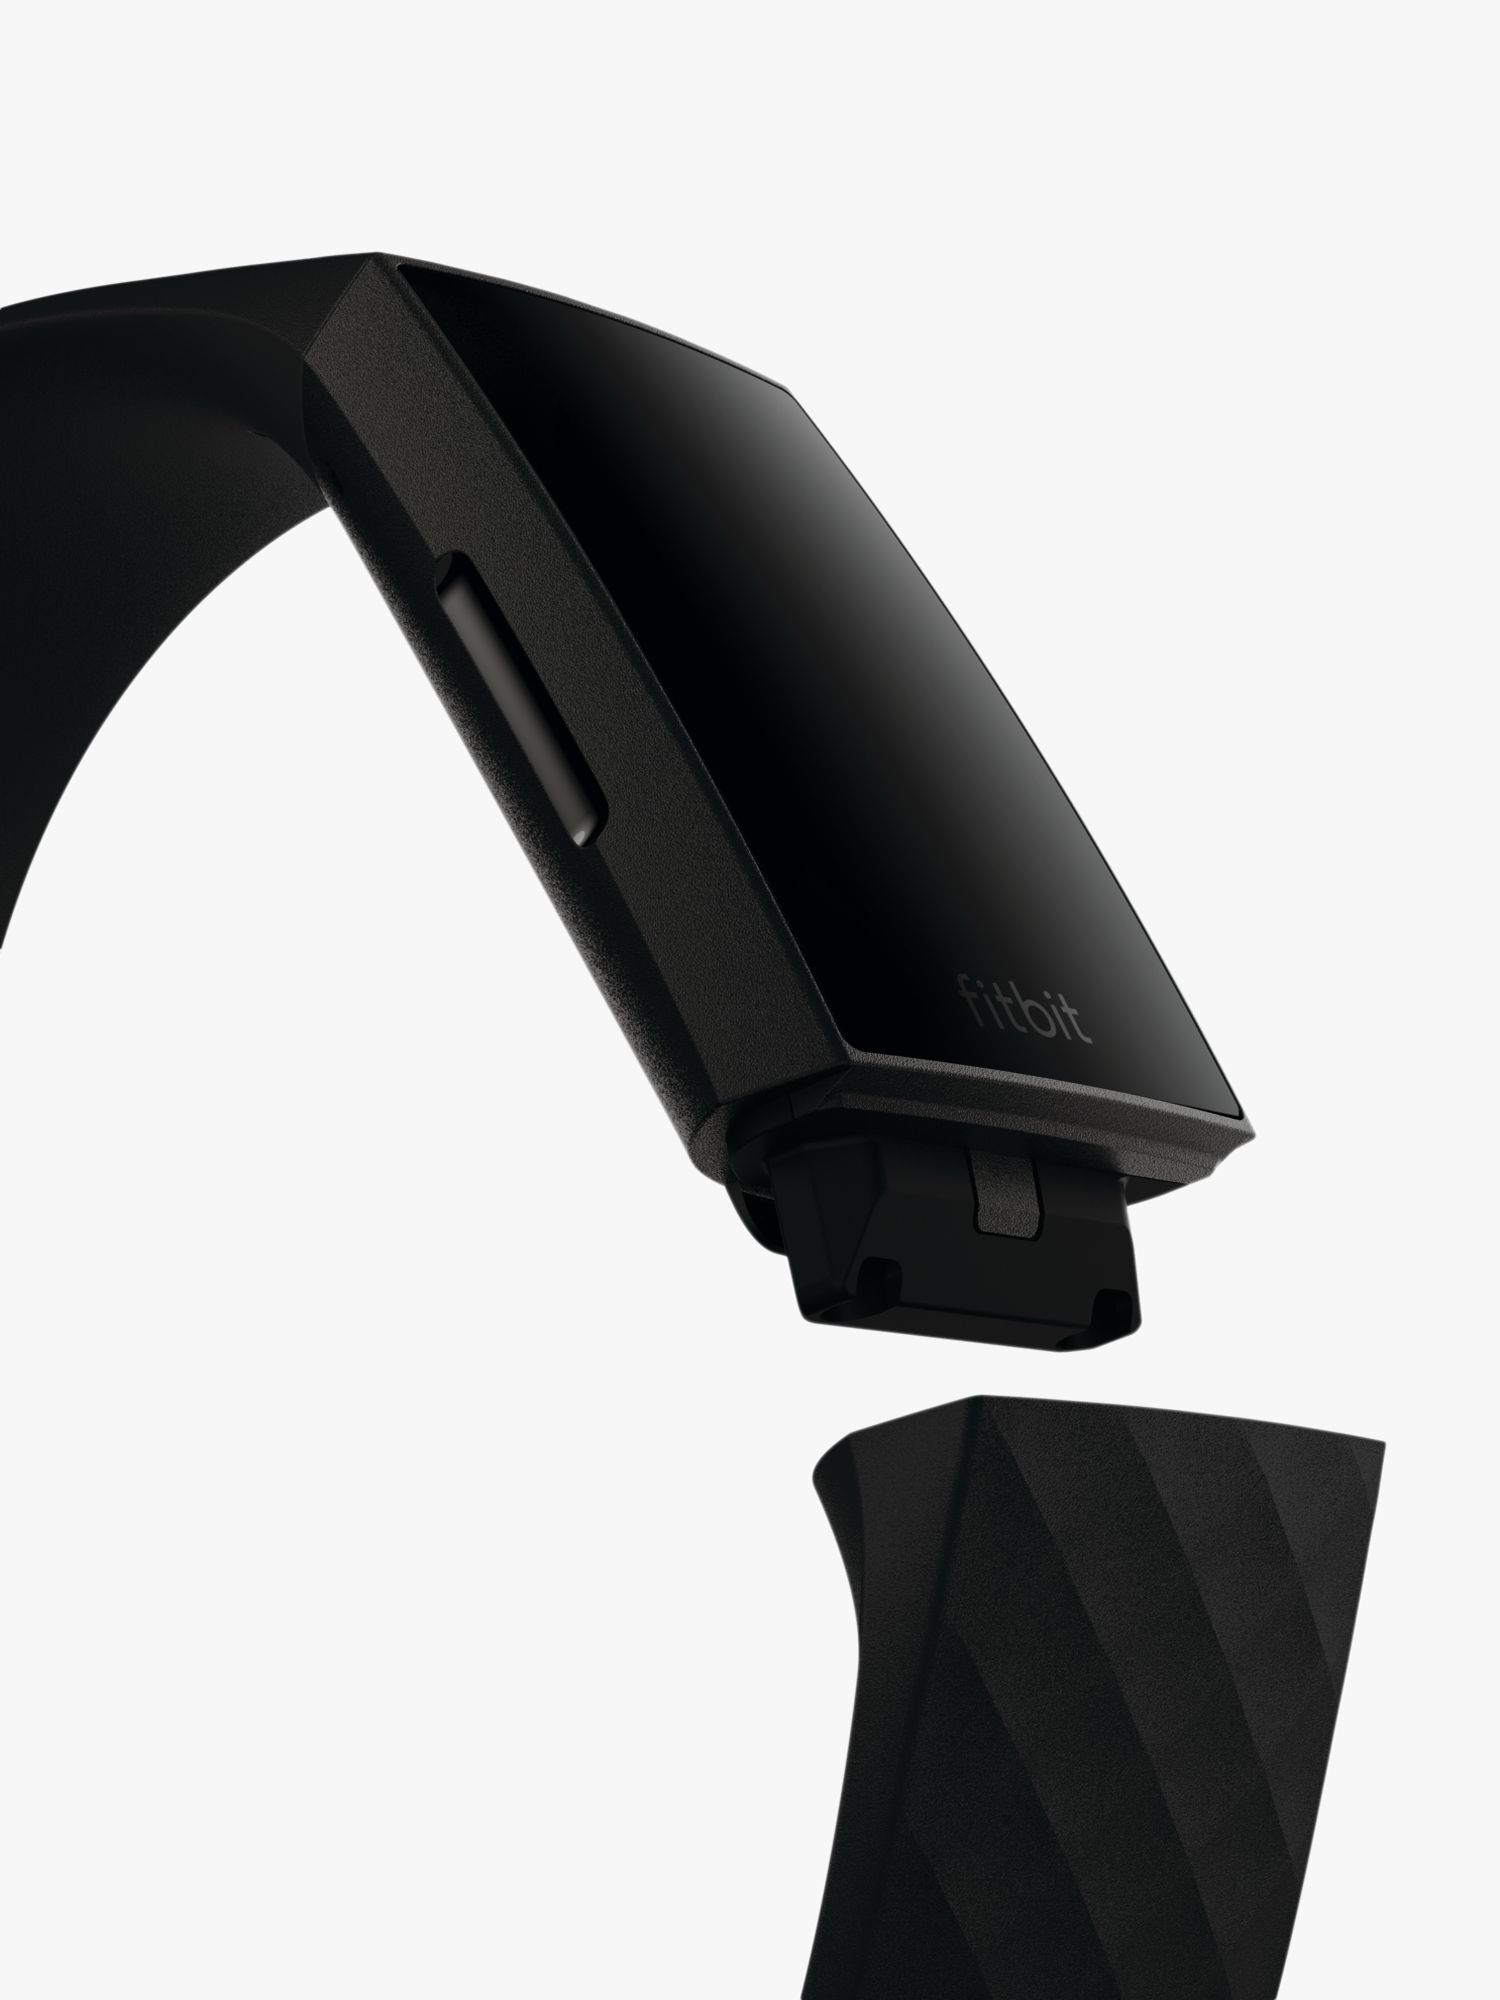 Fitbit Charge 4, Health and Fitness 